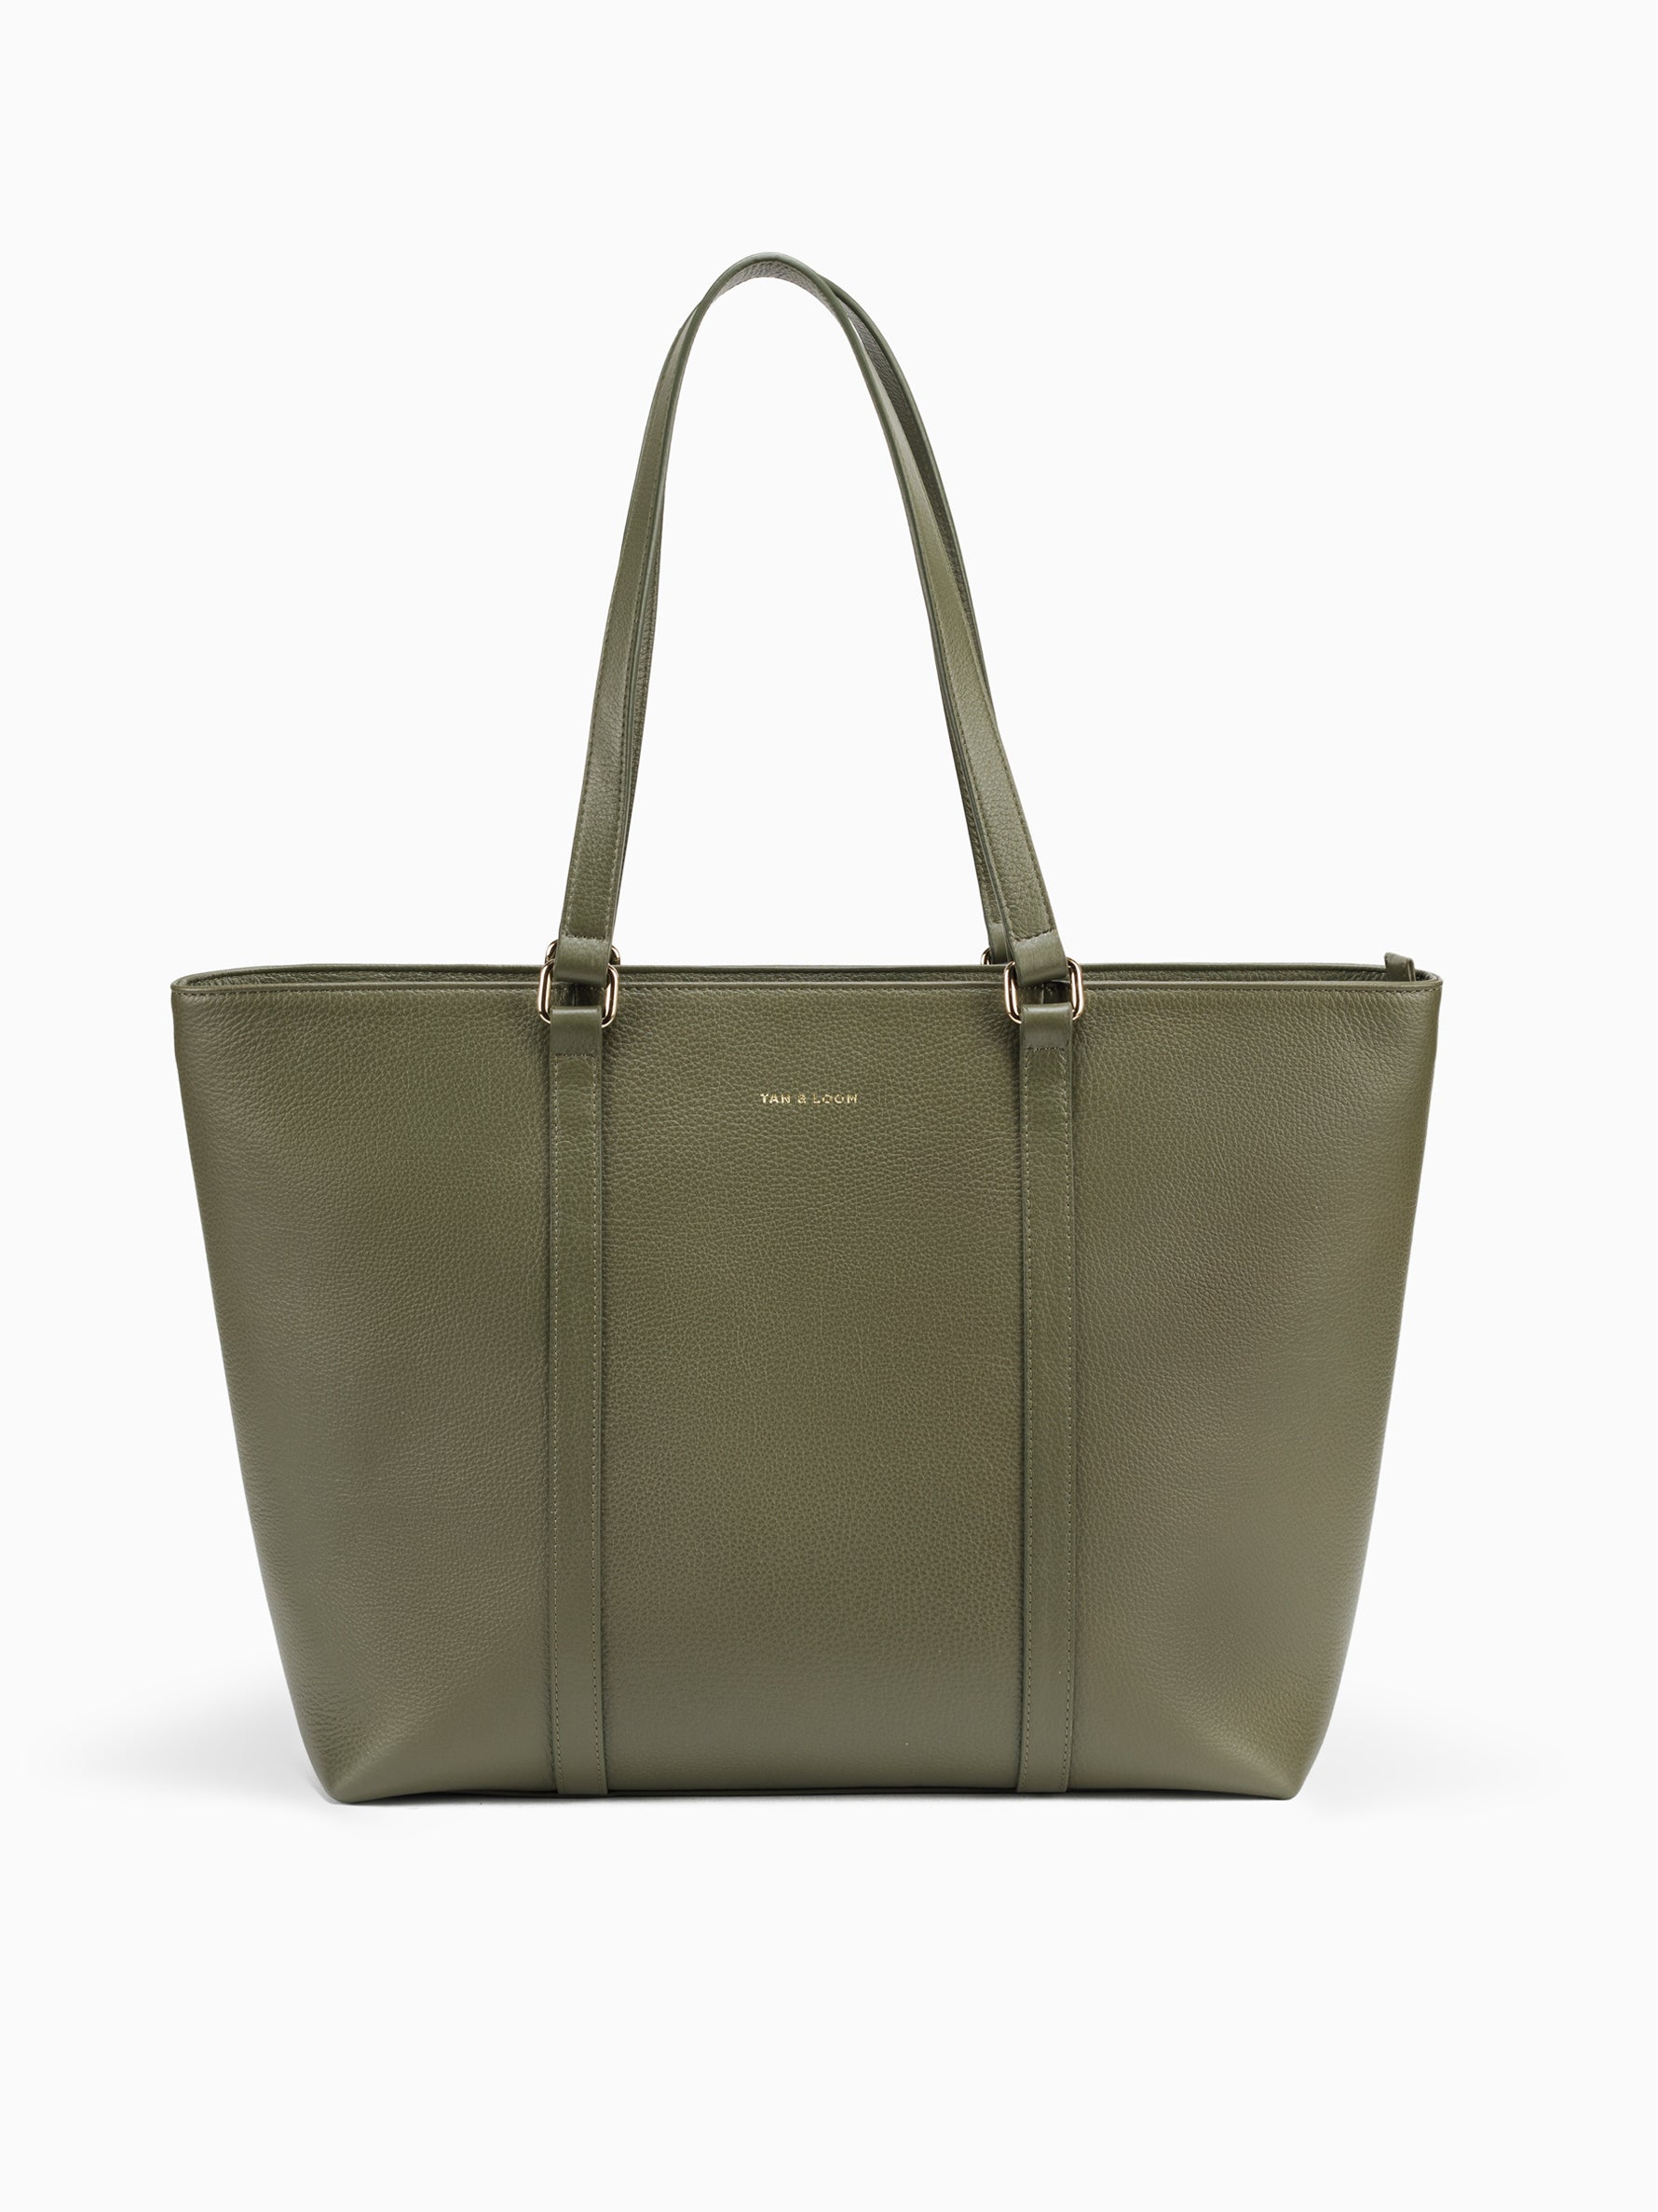 Handcrafted genuine leather office tote bag for women Olive Green